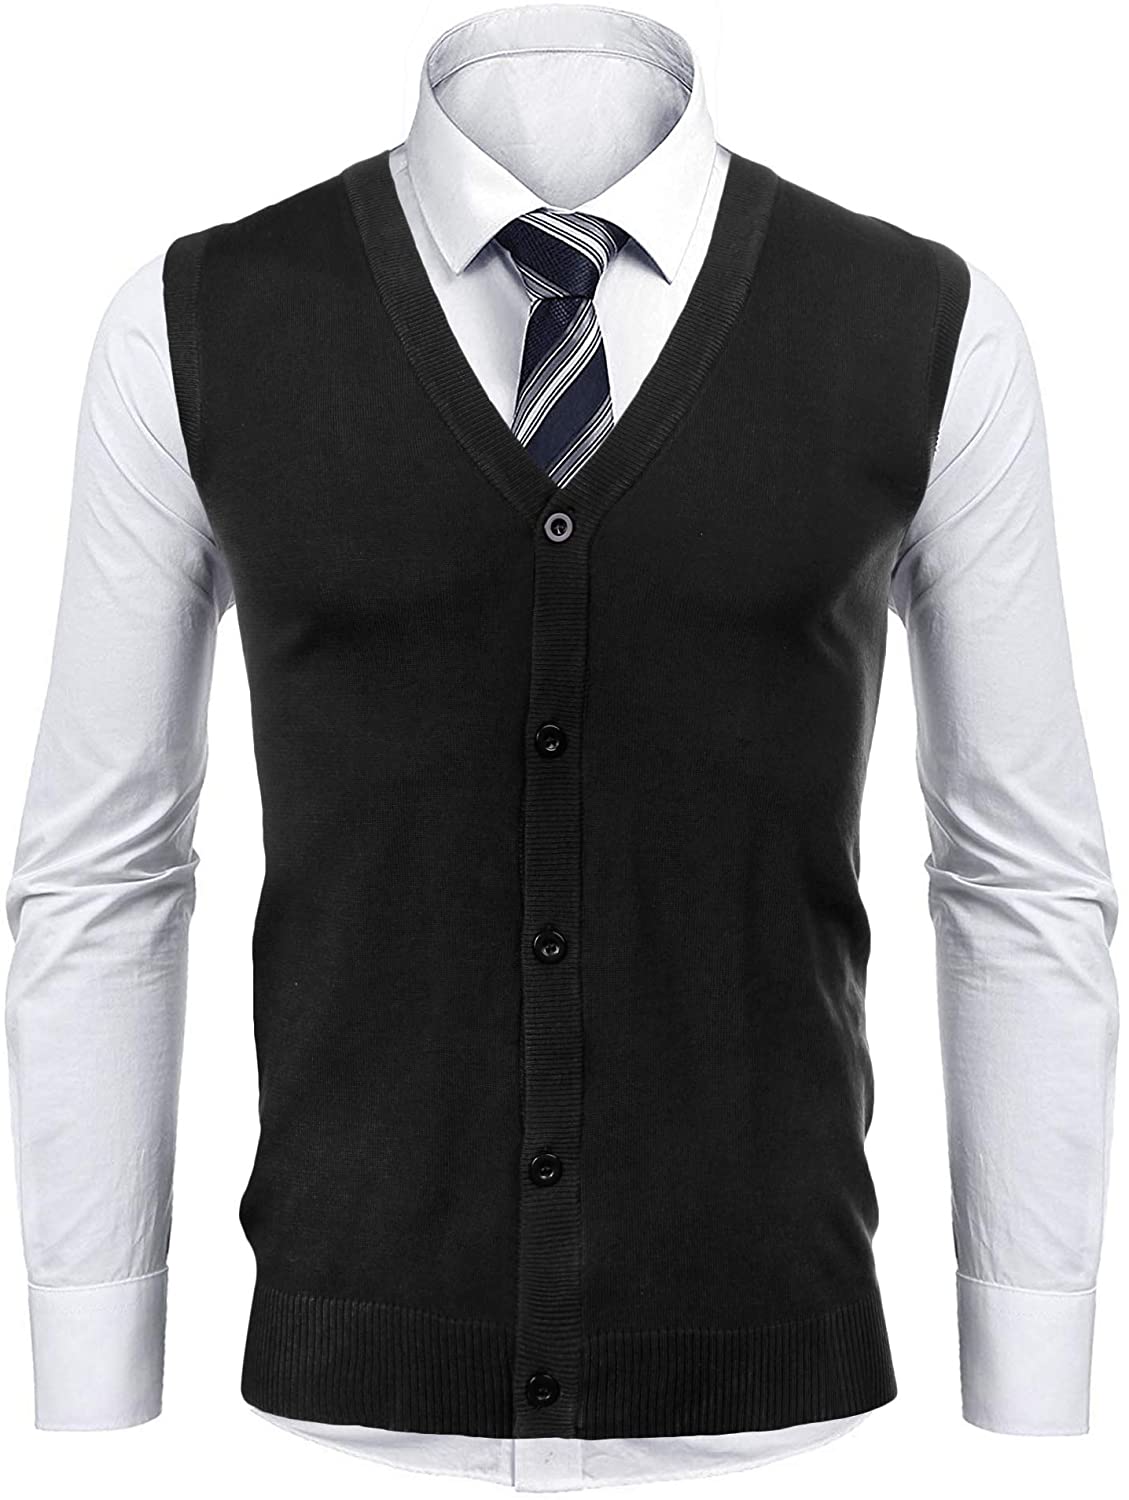 iClosam Mens V-Neck Slim Fit Sweater Vests Knitted Lightweight Button ...